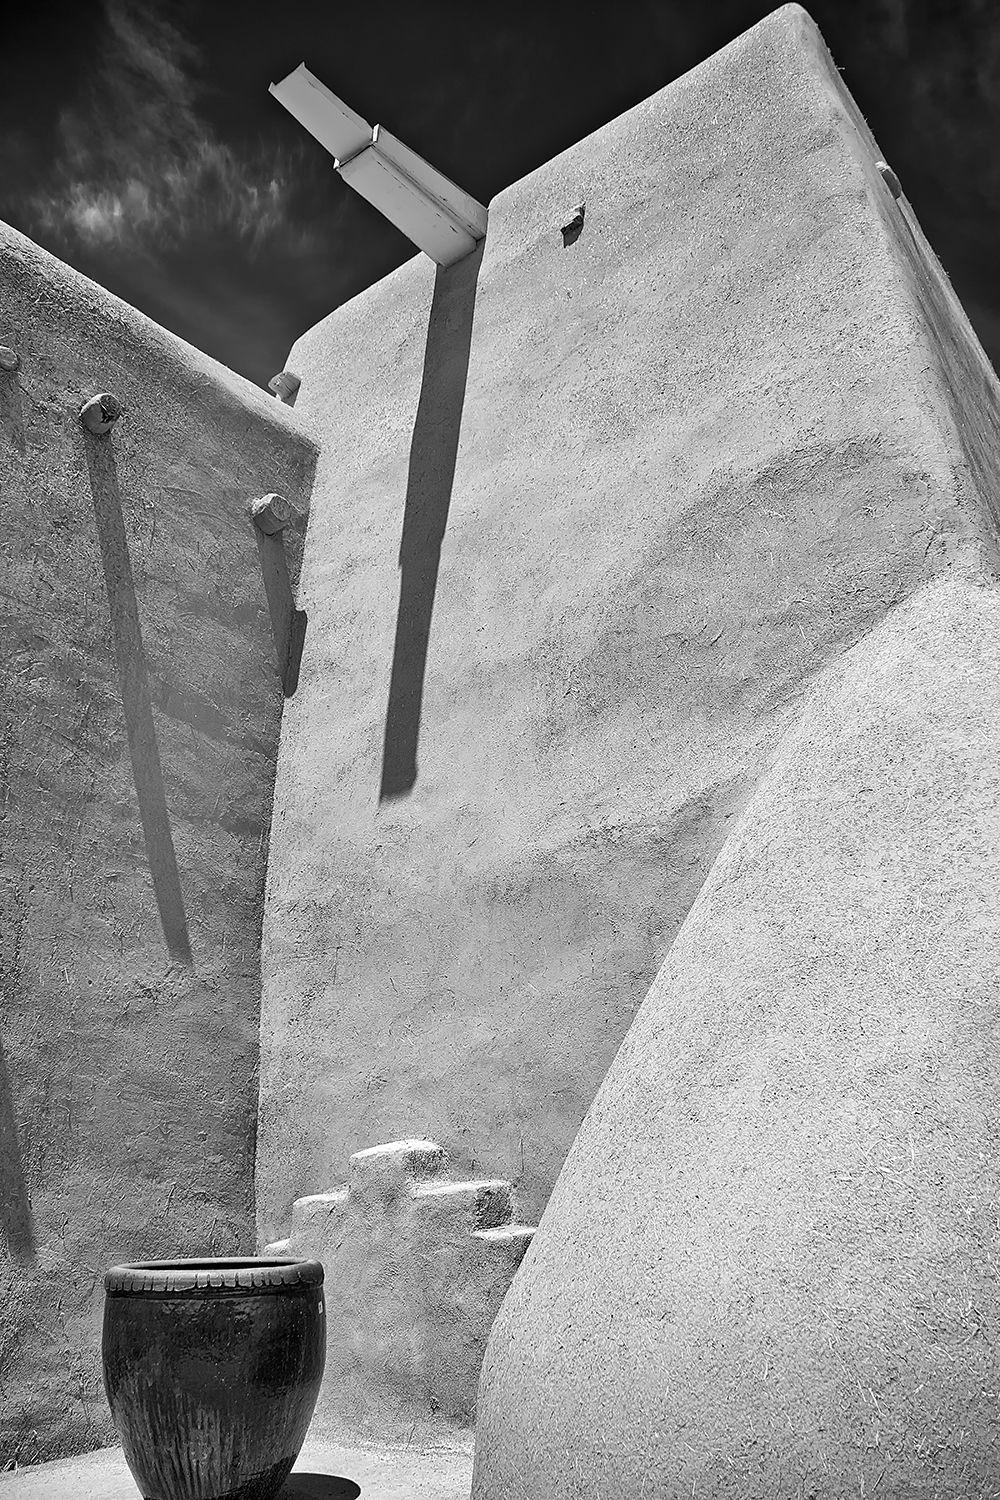 Daniel Ashe Black and White Photograph - Mission Church of Rancho de Taos No. 5, Photograph, Archival Ink Jet